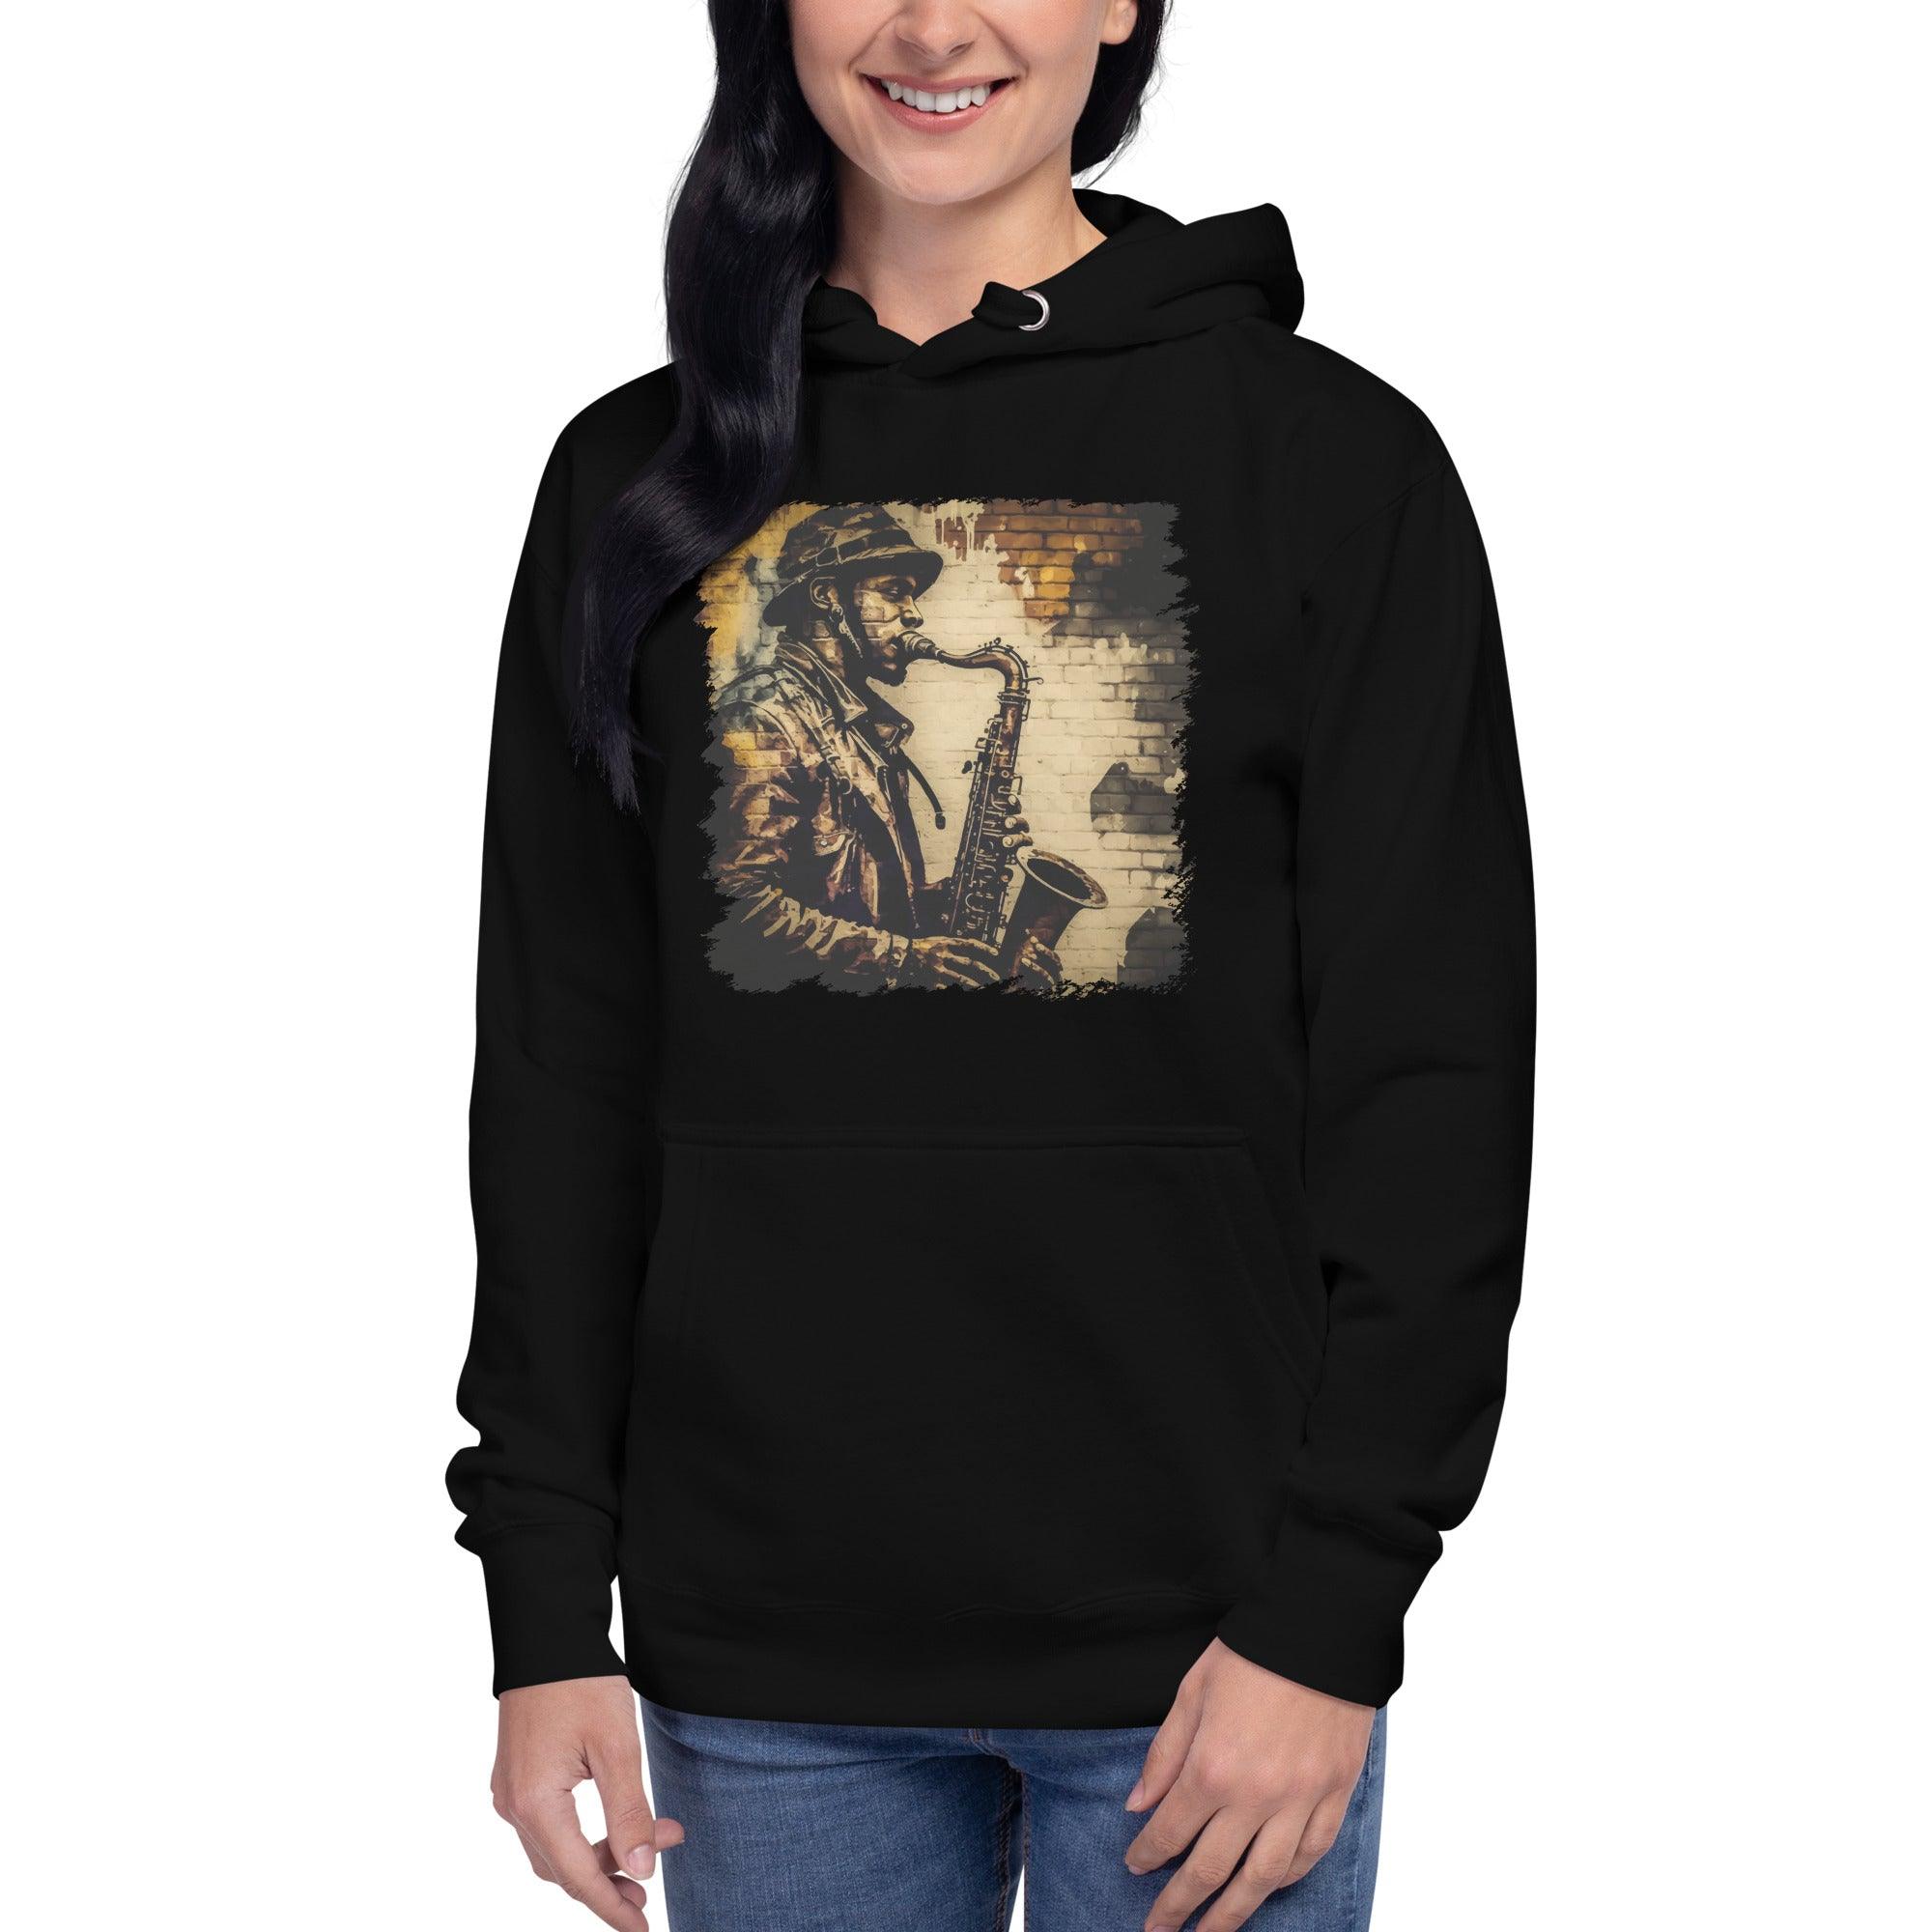 Blowin' On The Horn Unisex Hoodie - Beyond T-shirts